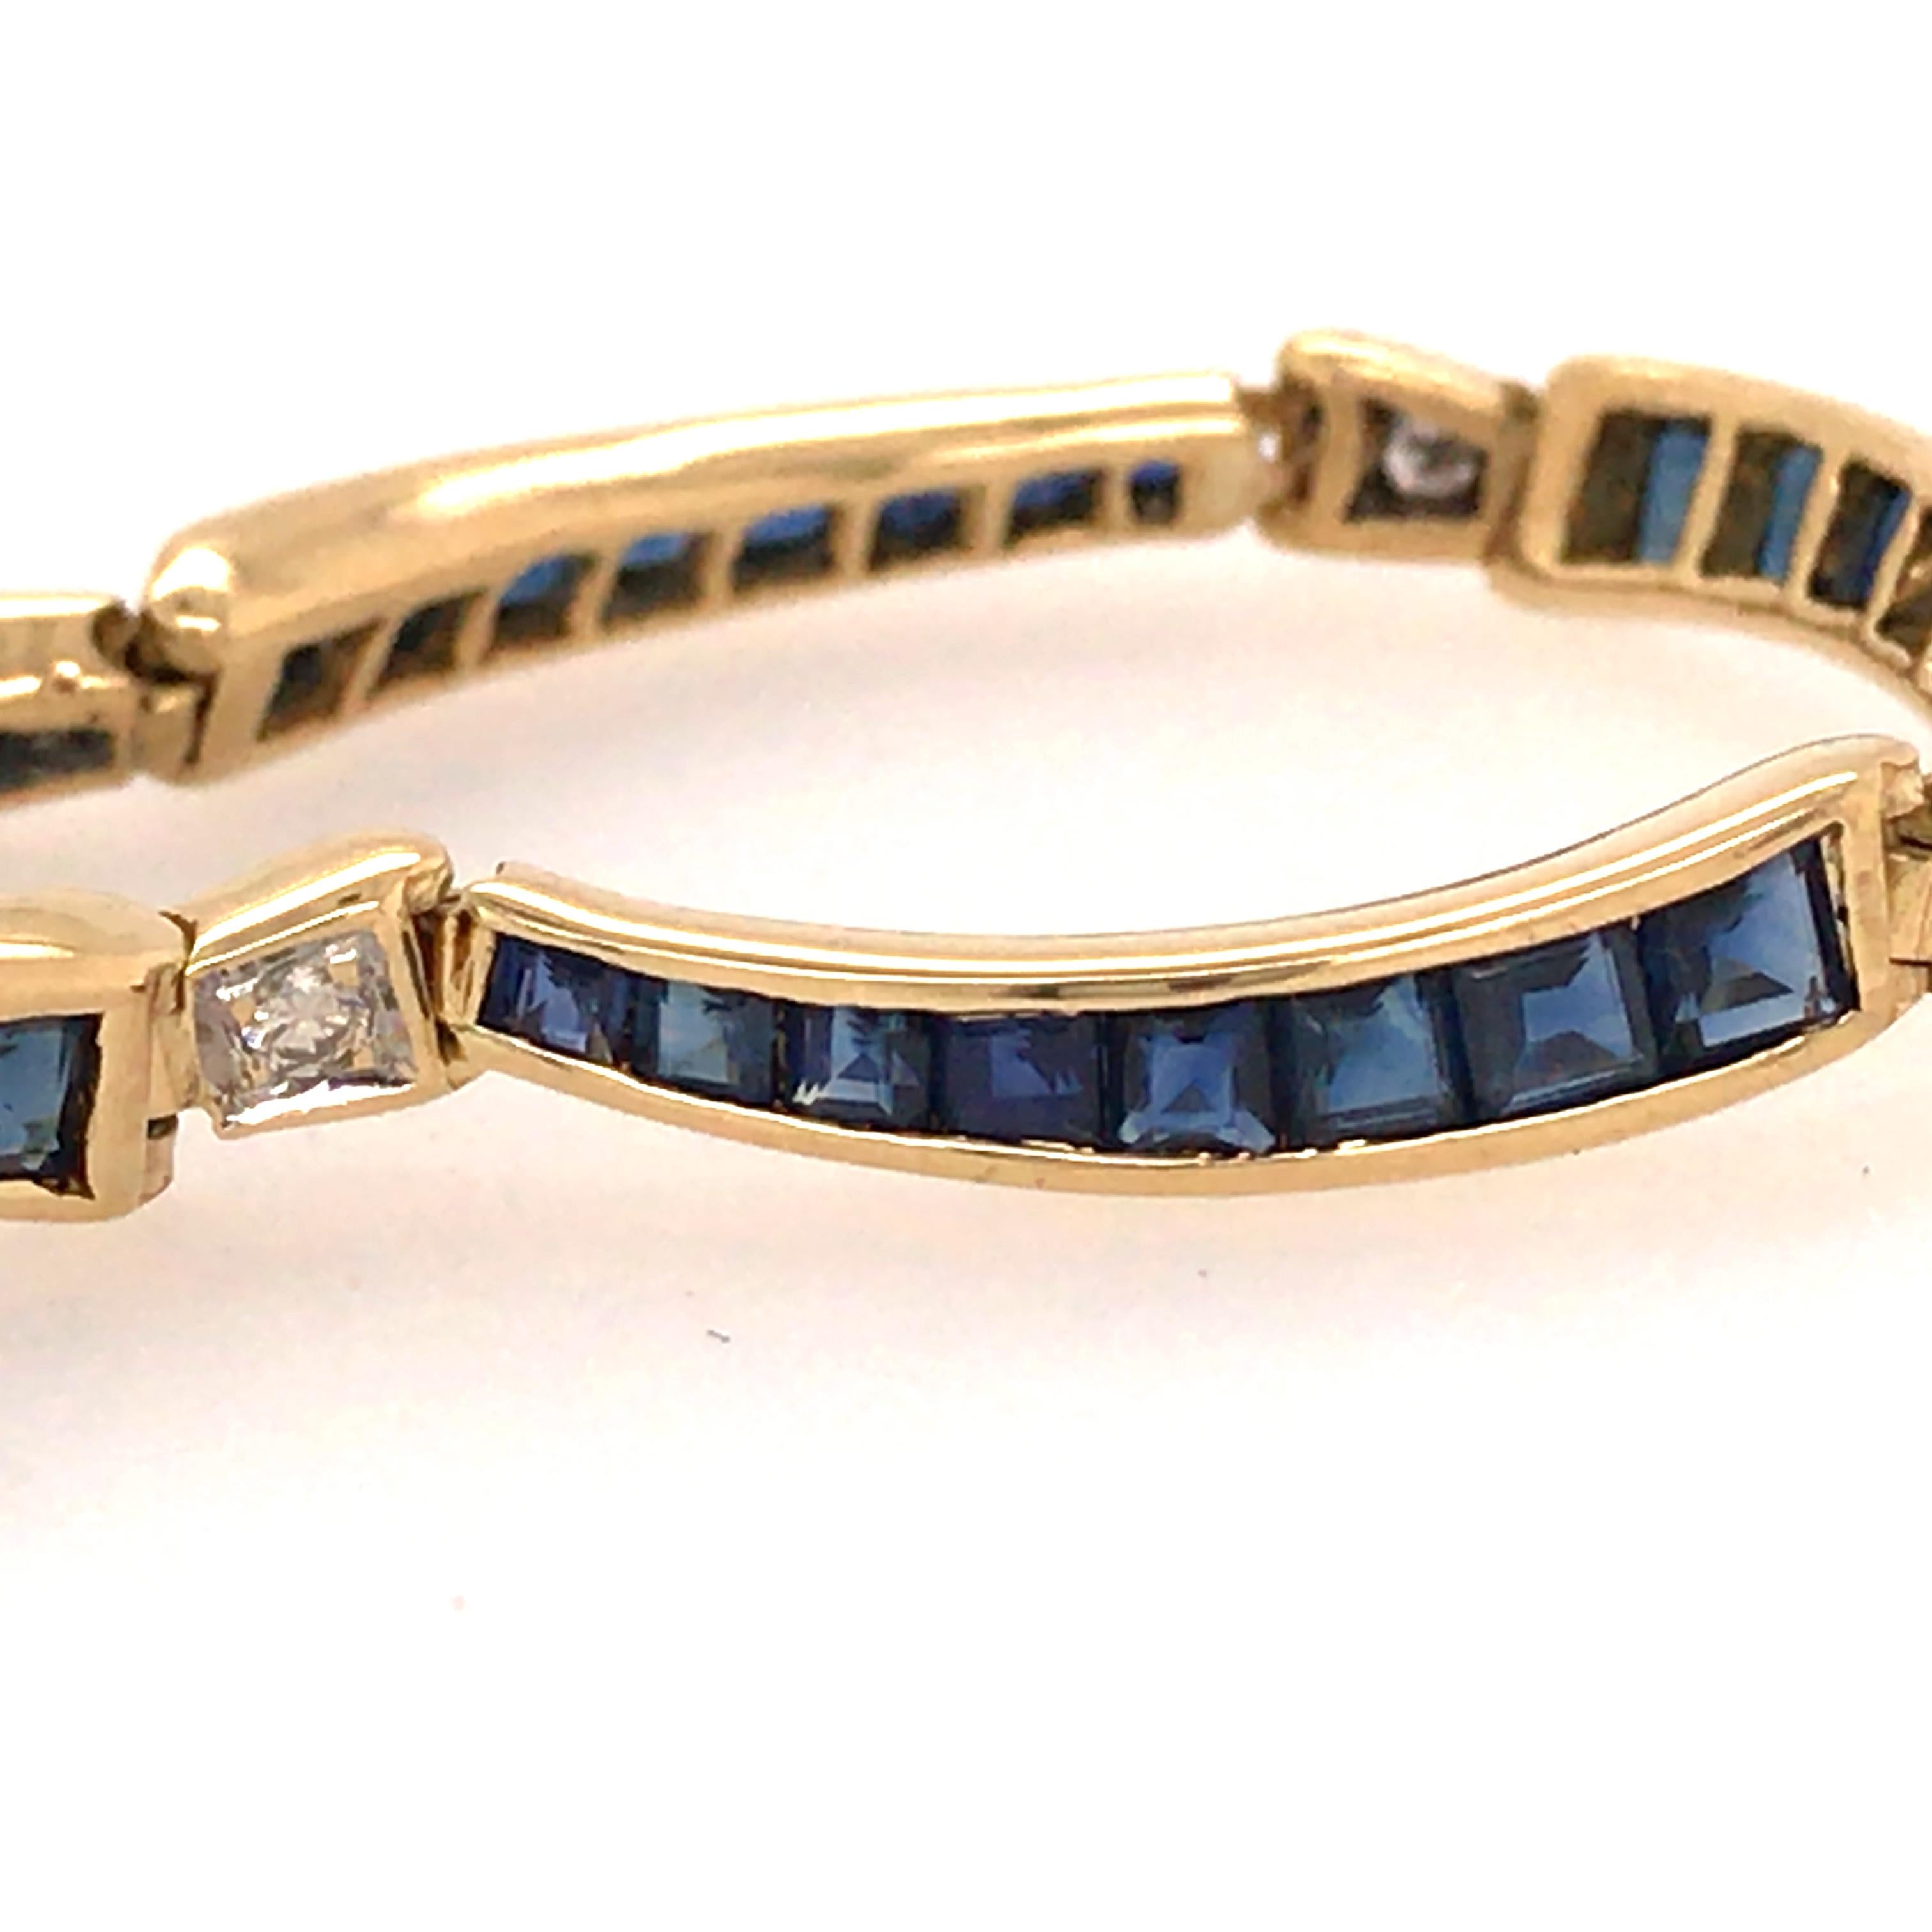 Diamond and Sapphire Link Bracelet in 18K Yellow Gold.  Links channel set with Sapphire Gemstones are alternating with (8) Round Brilliant Cut Diamonds weighing .09 carat total weight G-H in color and VS-SI in clarity.  The bracelet measures 7